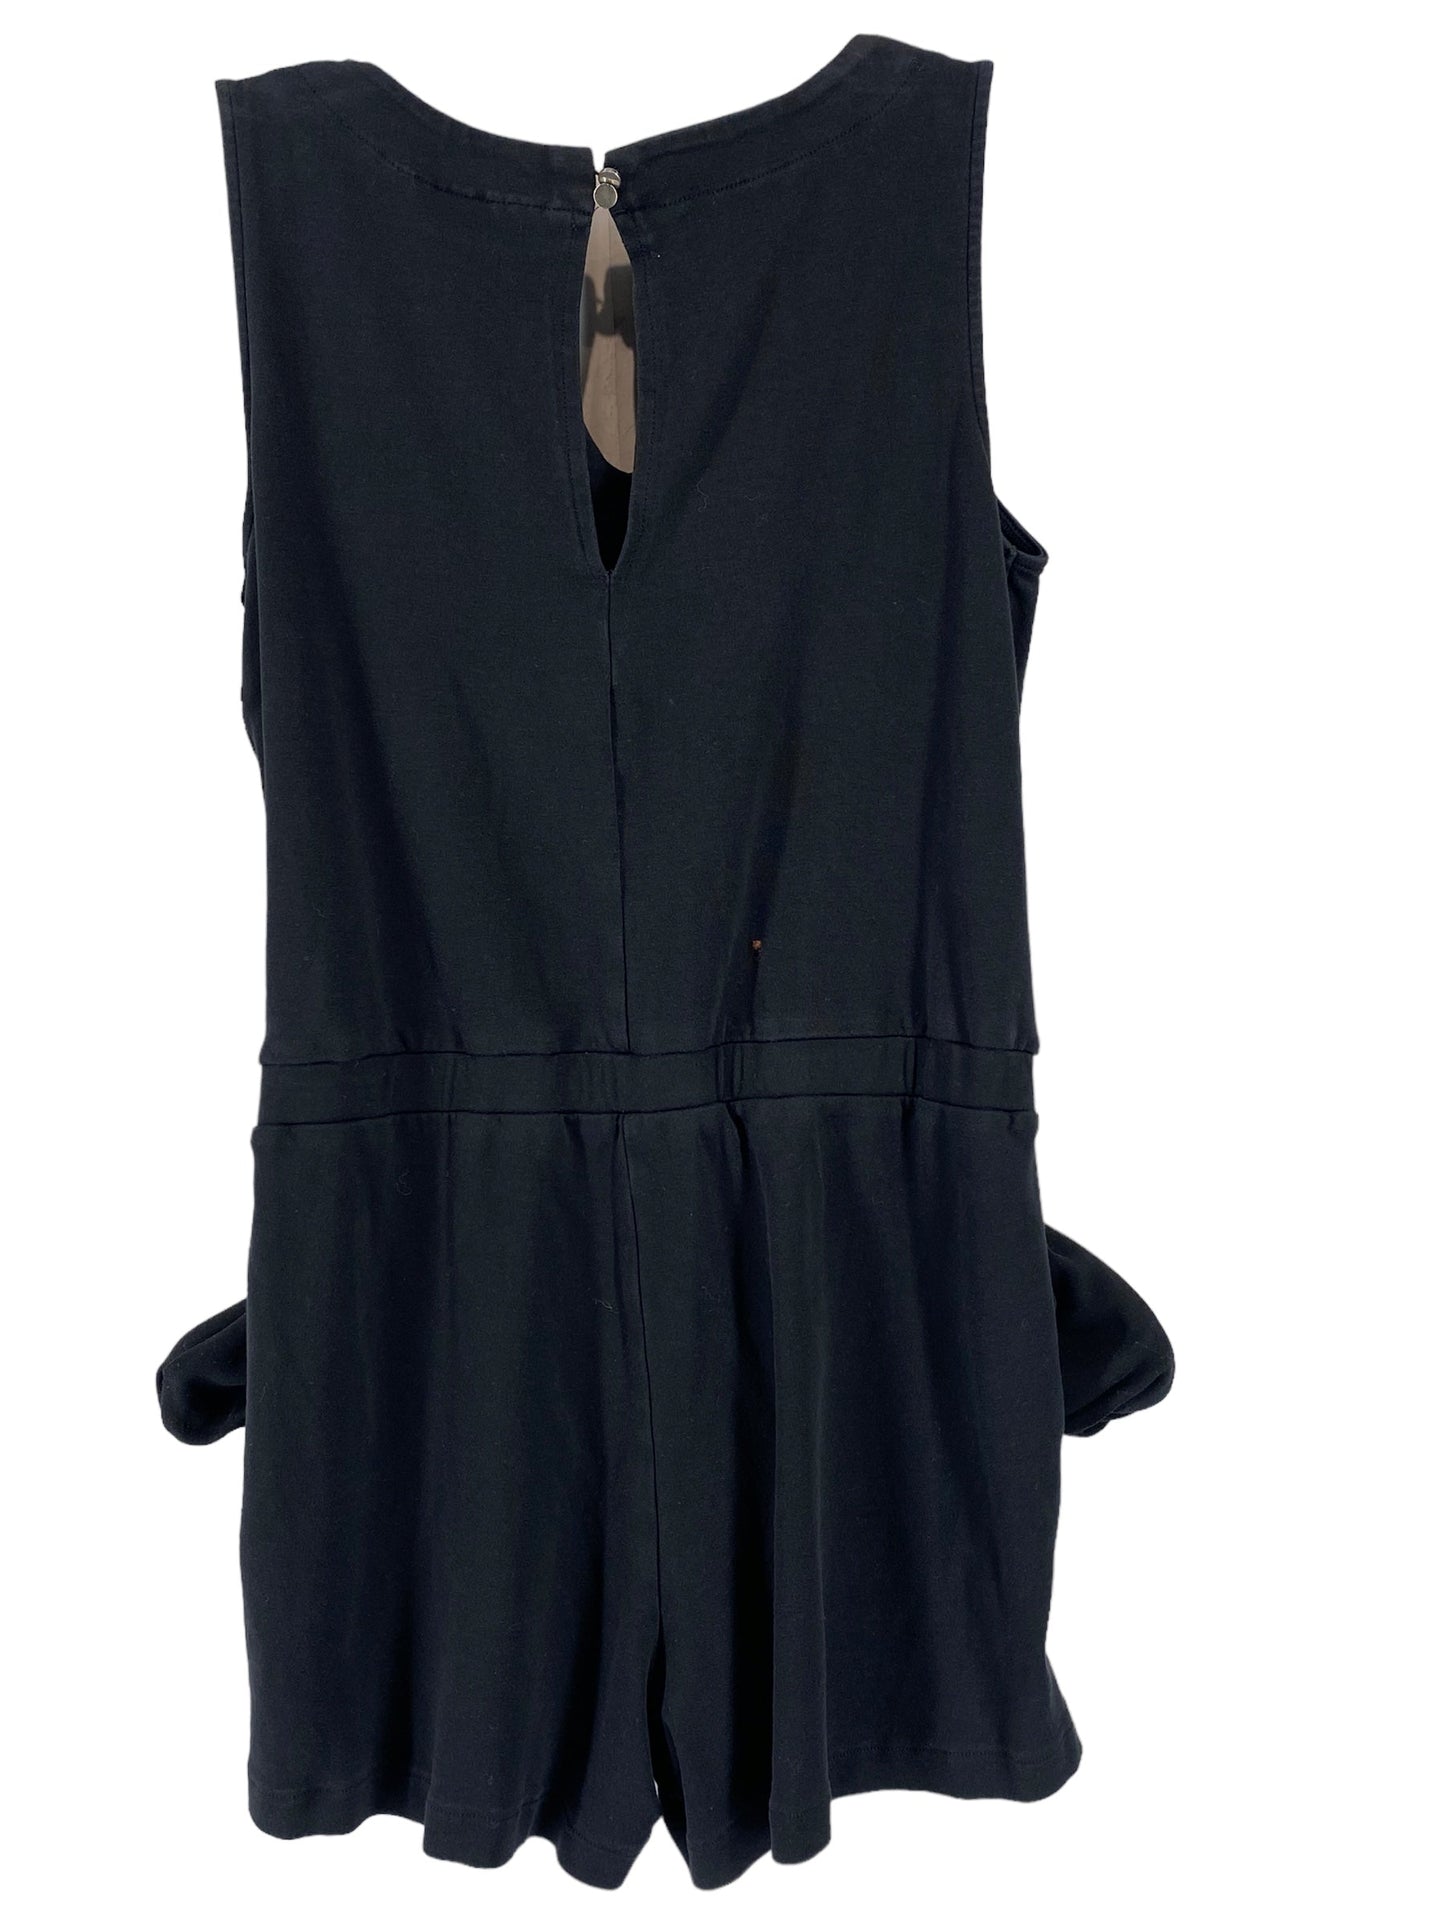 Jumpsuit By New York And Co  Size: M